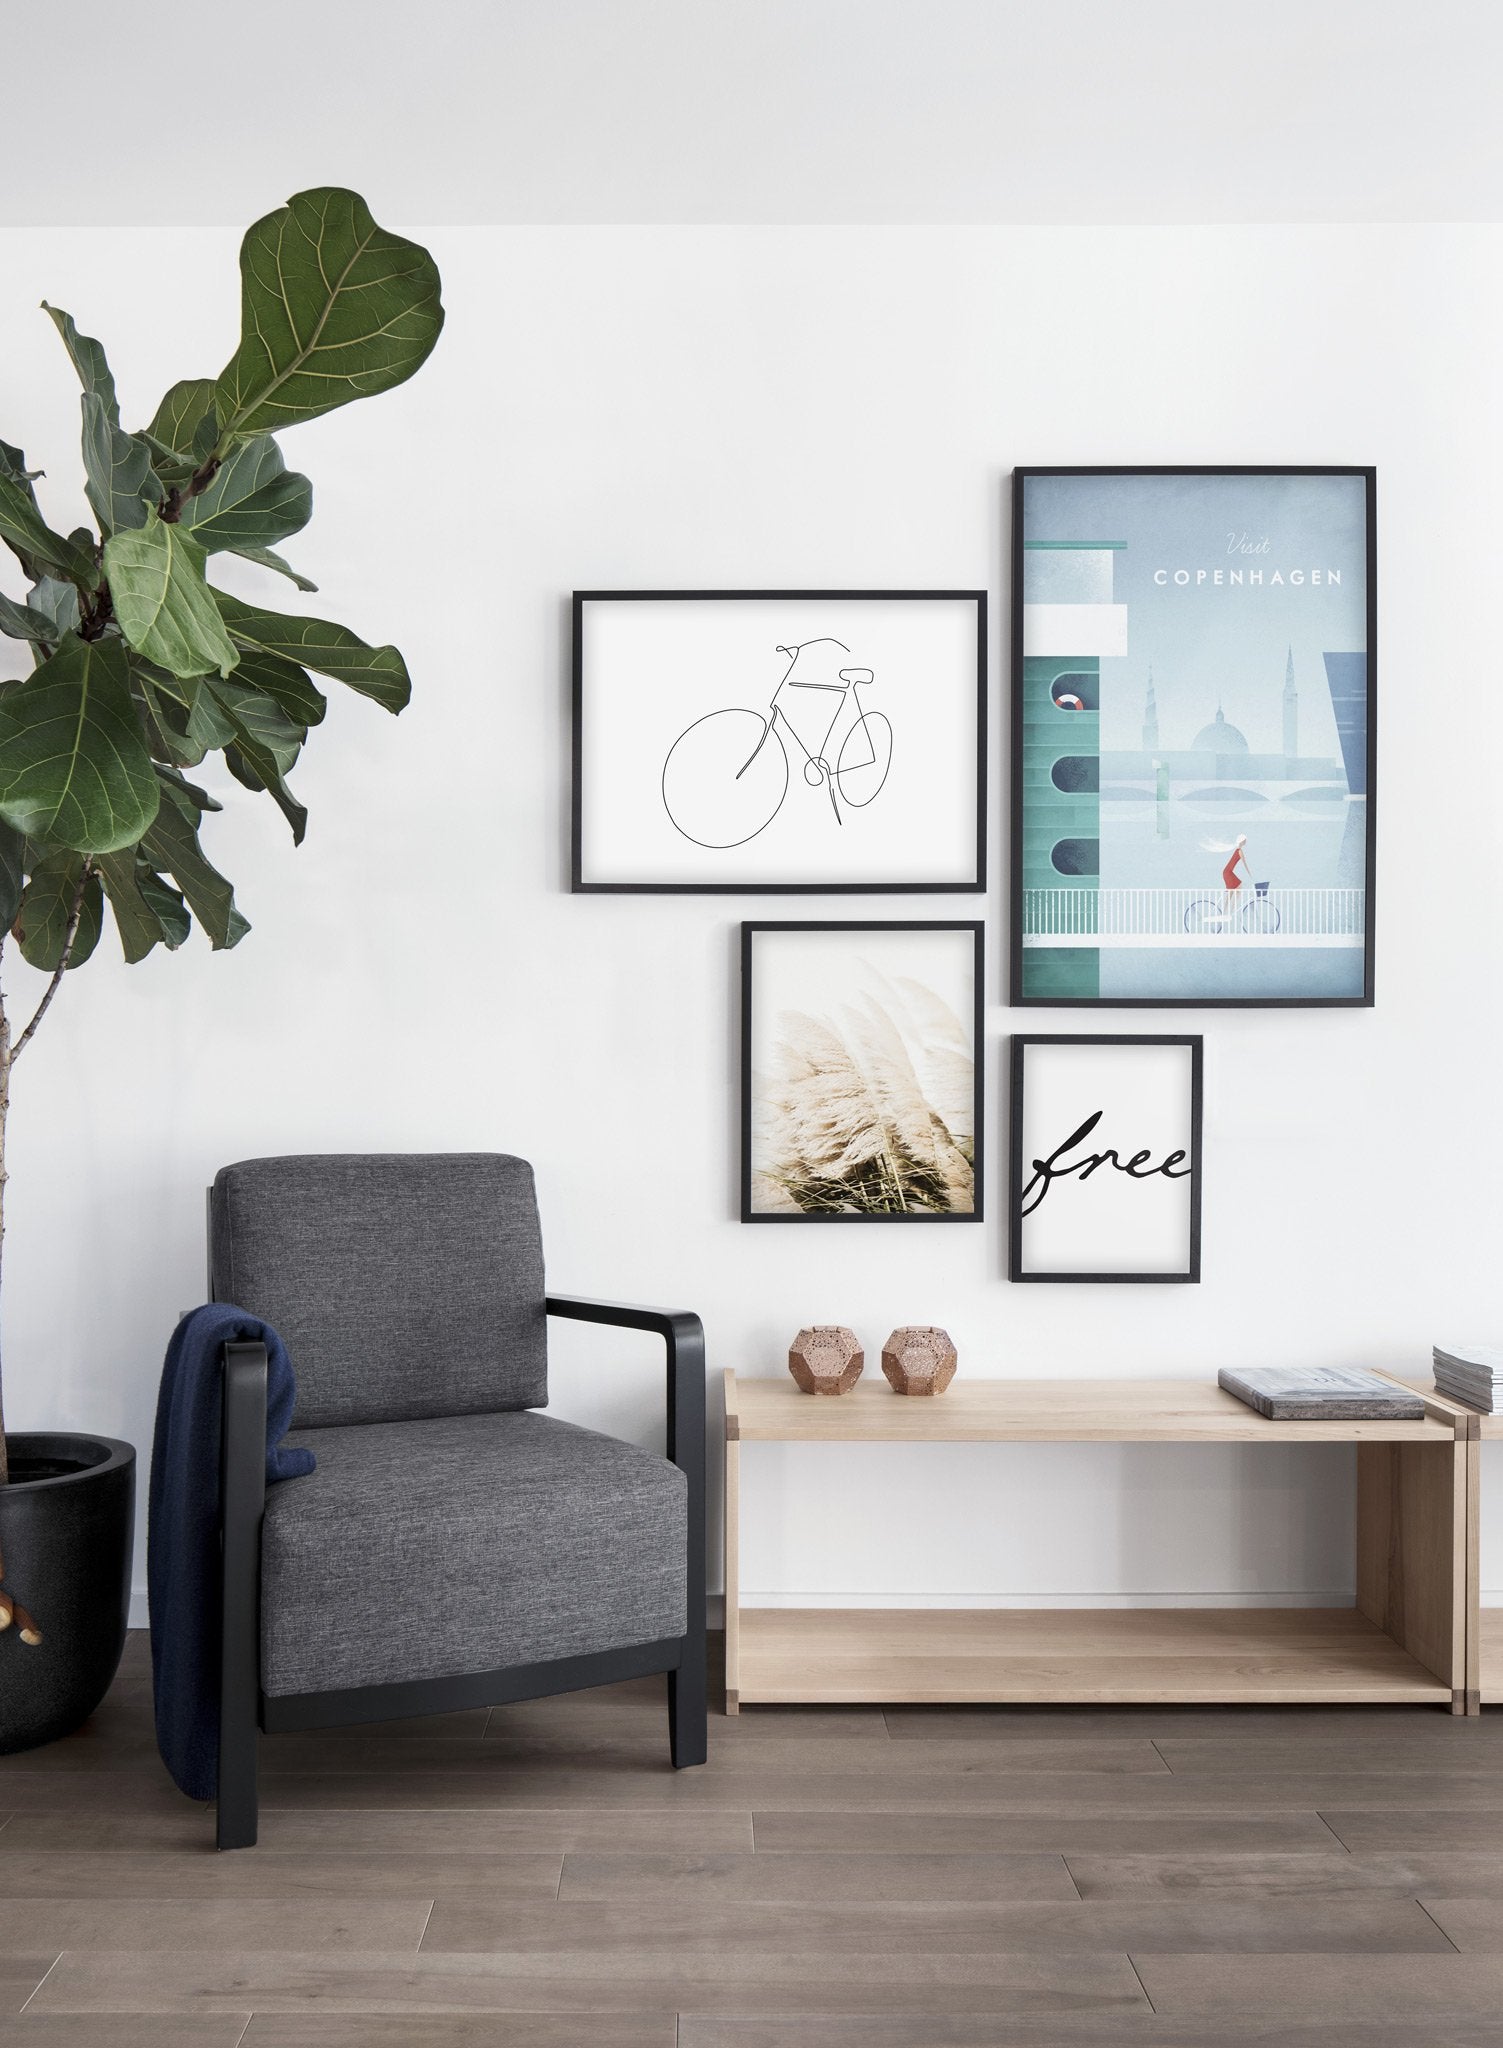 Modern minimalist poster by Opposite Wall with poster trio of illustration of Canada - EntrywayModern minimalist poster by Opposite Wall with poster trio of illustration of CanaModern minimalist poster by Opposite Wall with poster quad of illustration of Copenhagen, Denmark - Living Room